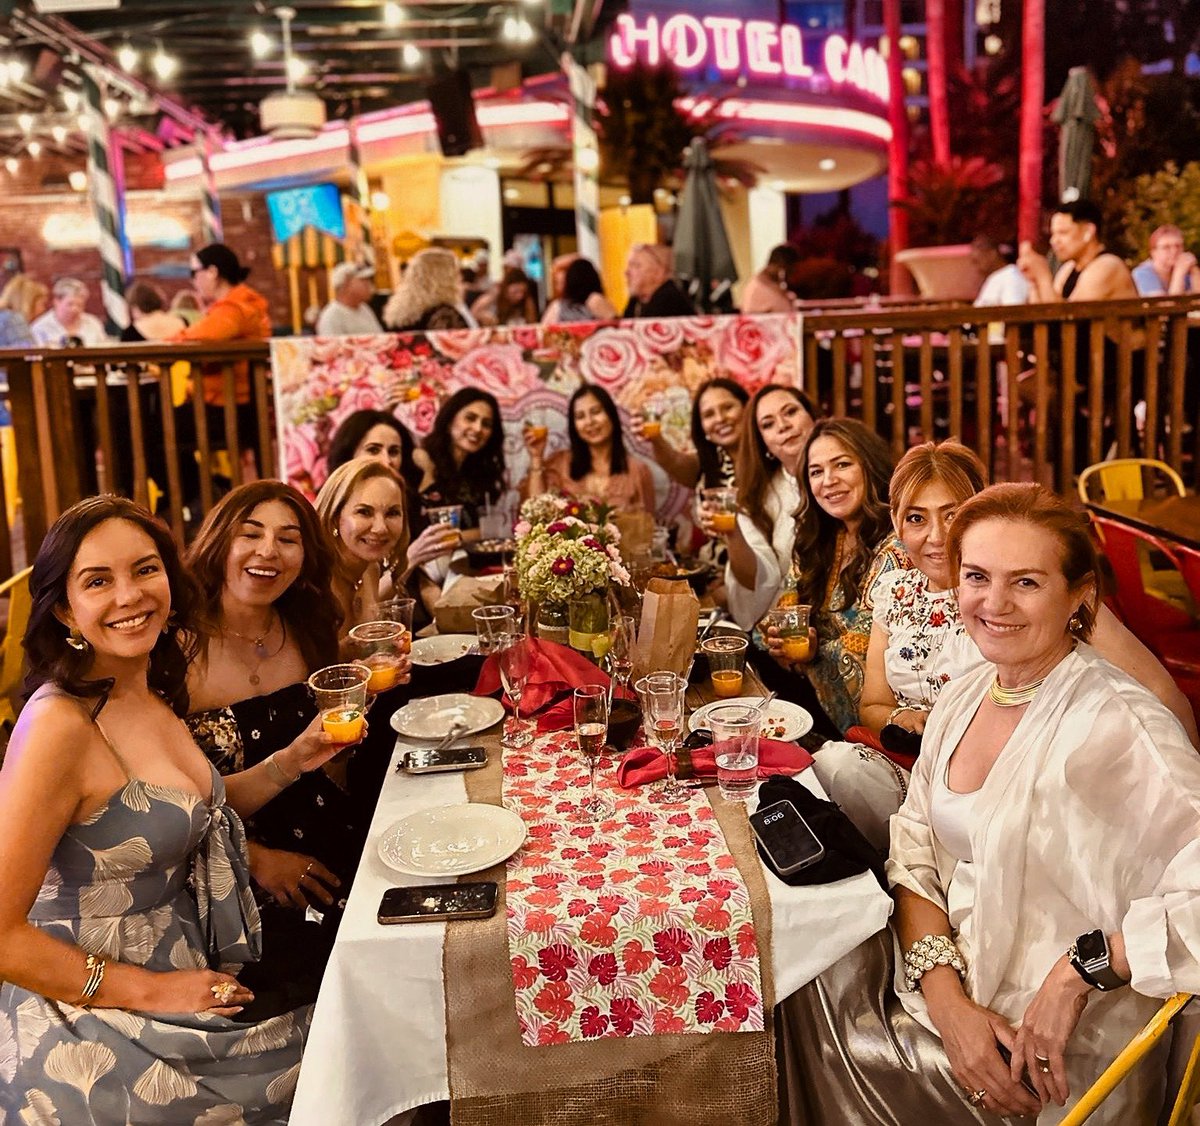 Champagne & Friends! 🥂👯
This is the way local moms celebrate Mother’s Day! 

•

Decorations by @thedelightlab ❤️

•
•

#vegas #lasvegas #lasvegashappyhour #vegashappyhour #lasvegasdrinks #vegasdrinks #vegasfood #lasvegasfood #vegasrestaurants #vegasrestaurant